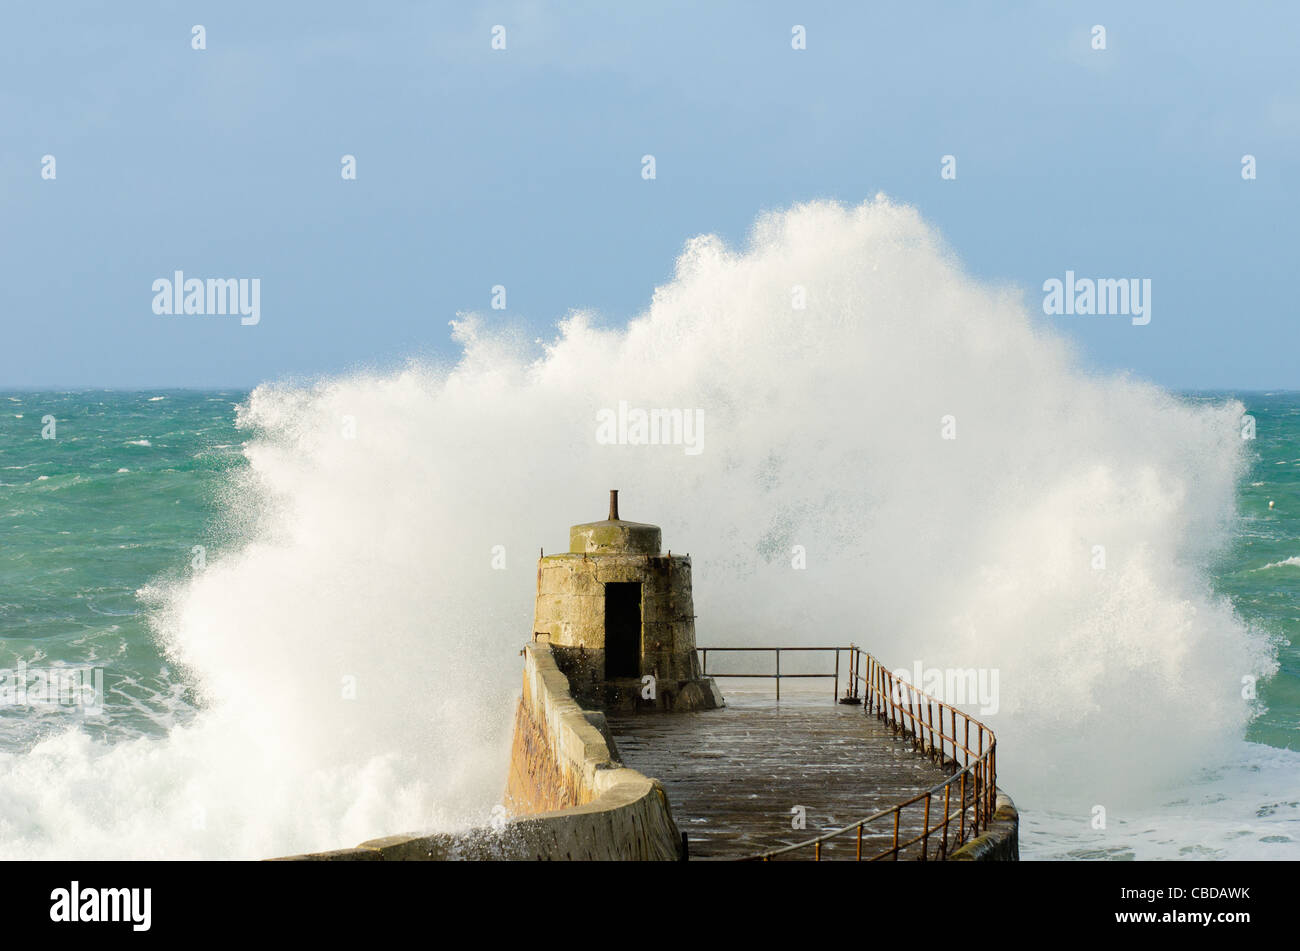 Portreath, on the North coast of Cornwall, between Newquay and St Ives showing the pier being hit by a large wave Stock Photo